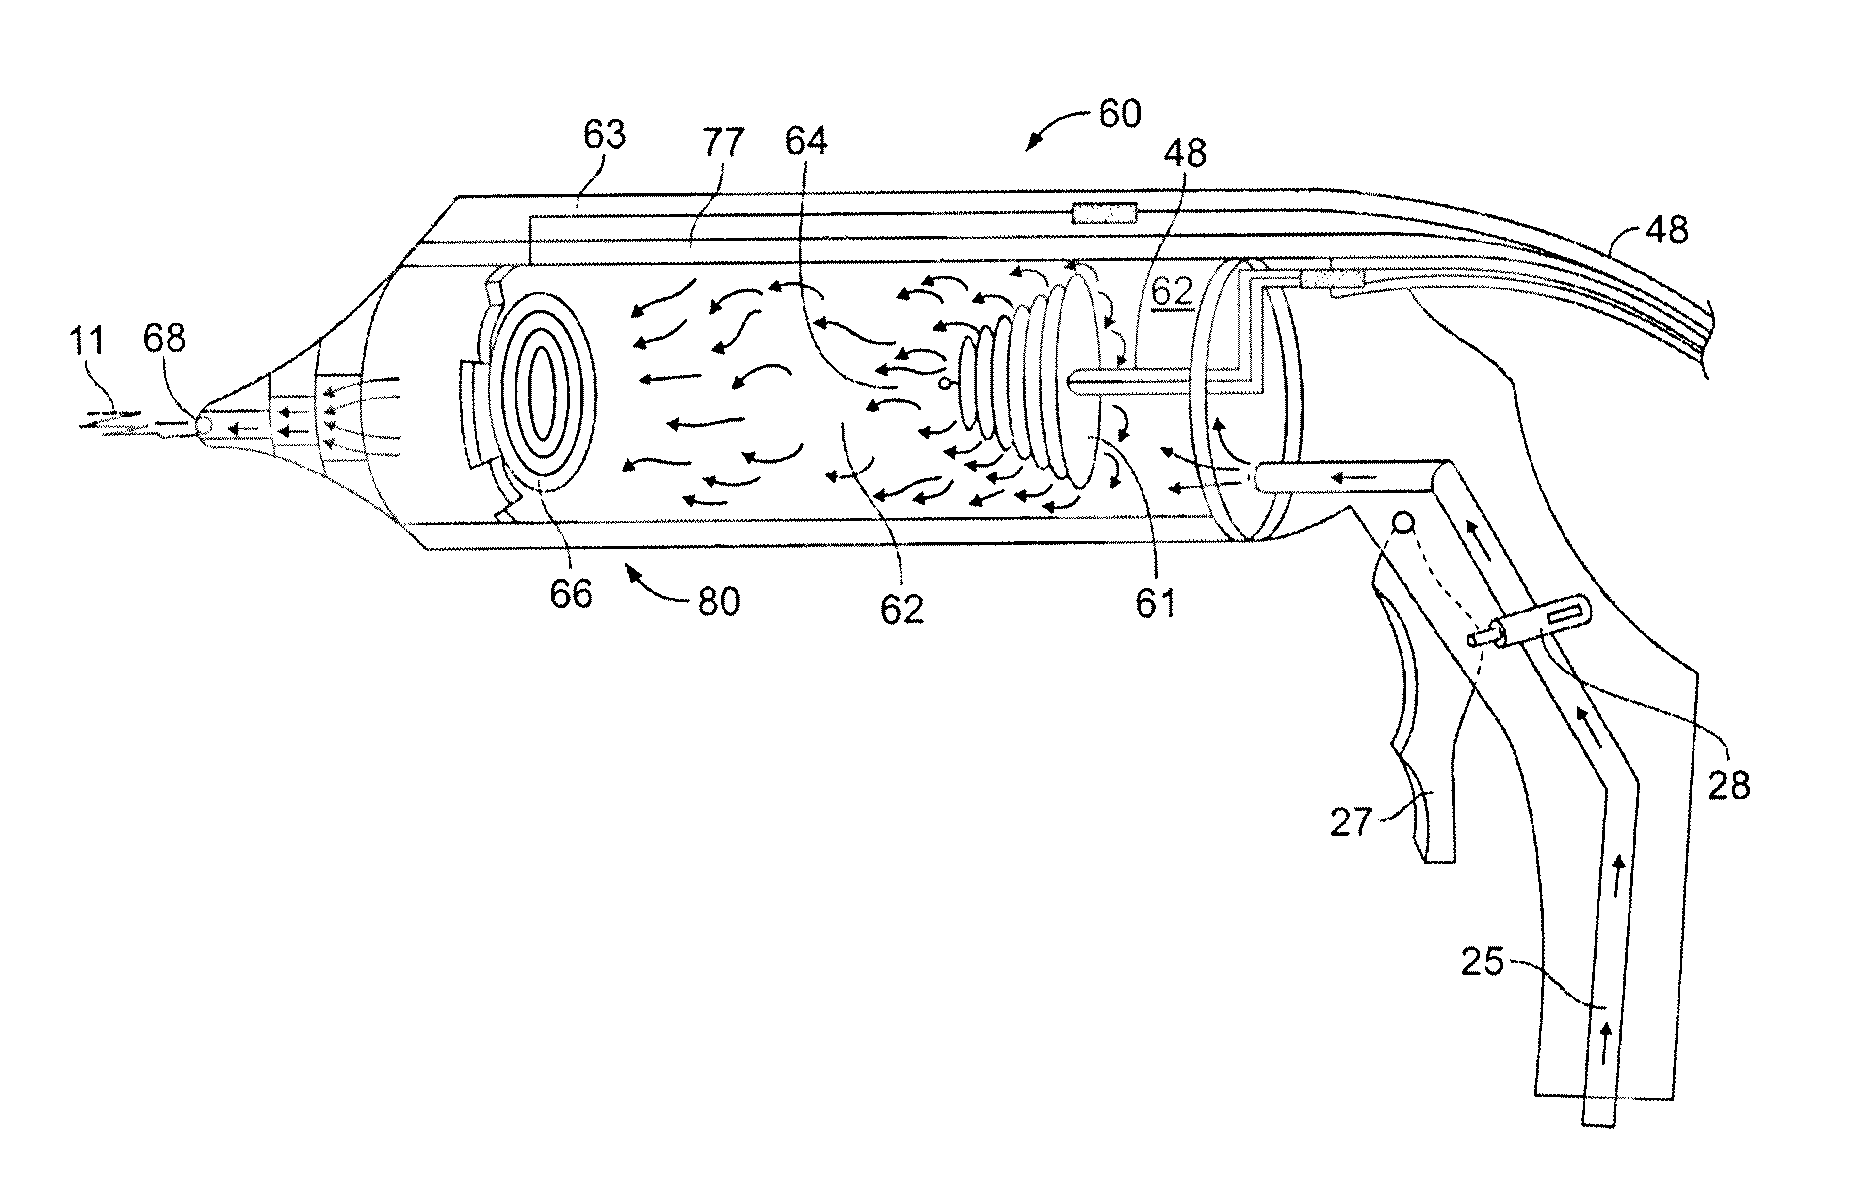 Cold plasma treatment devices and associated methods